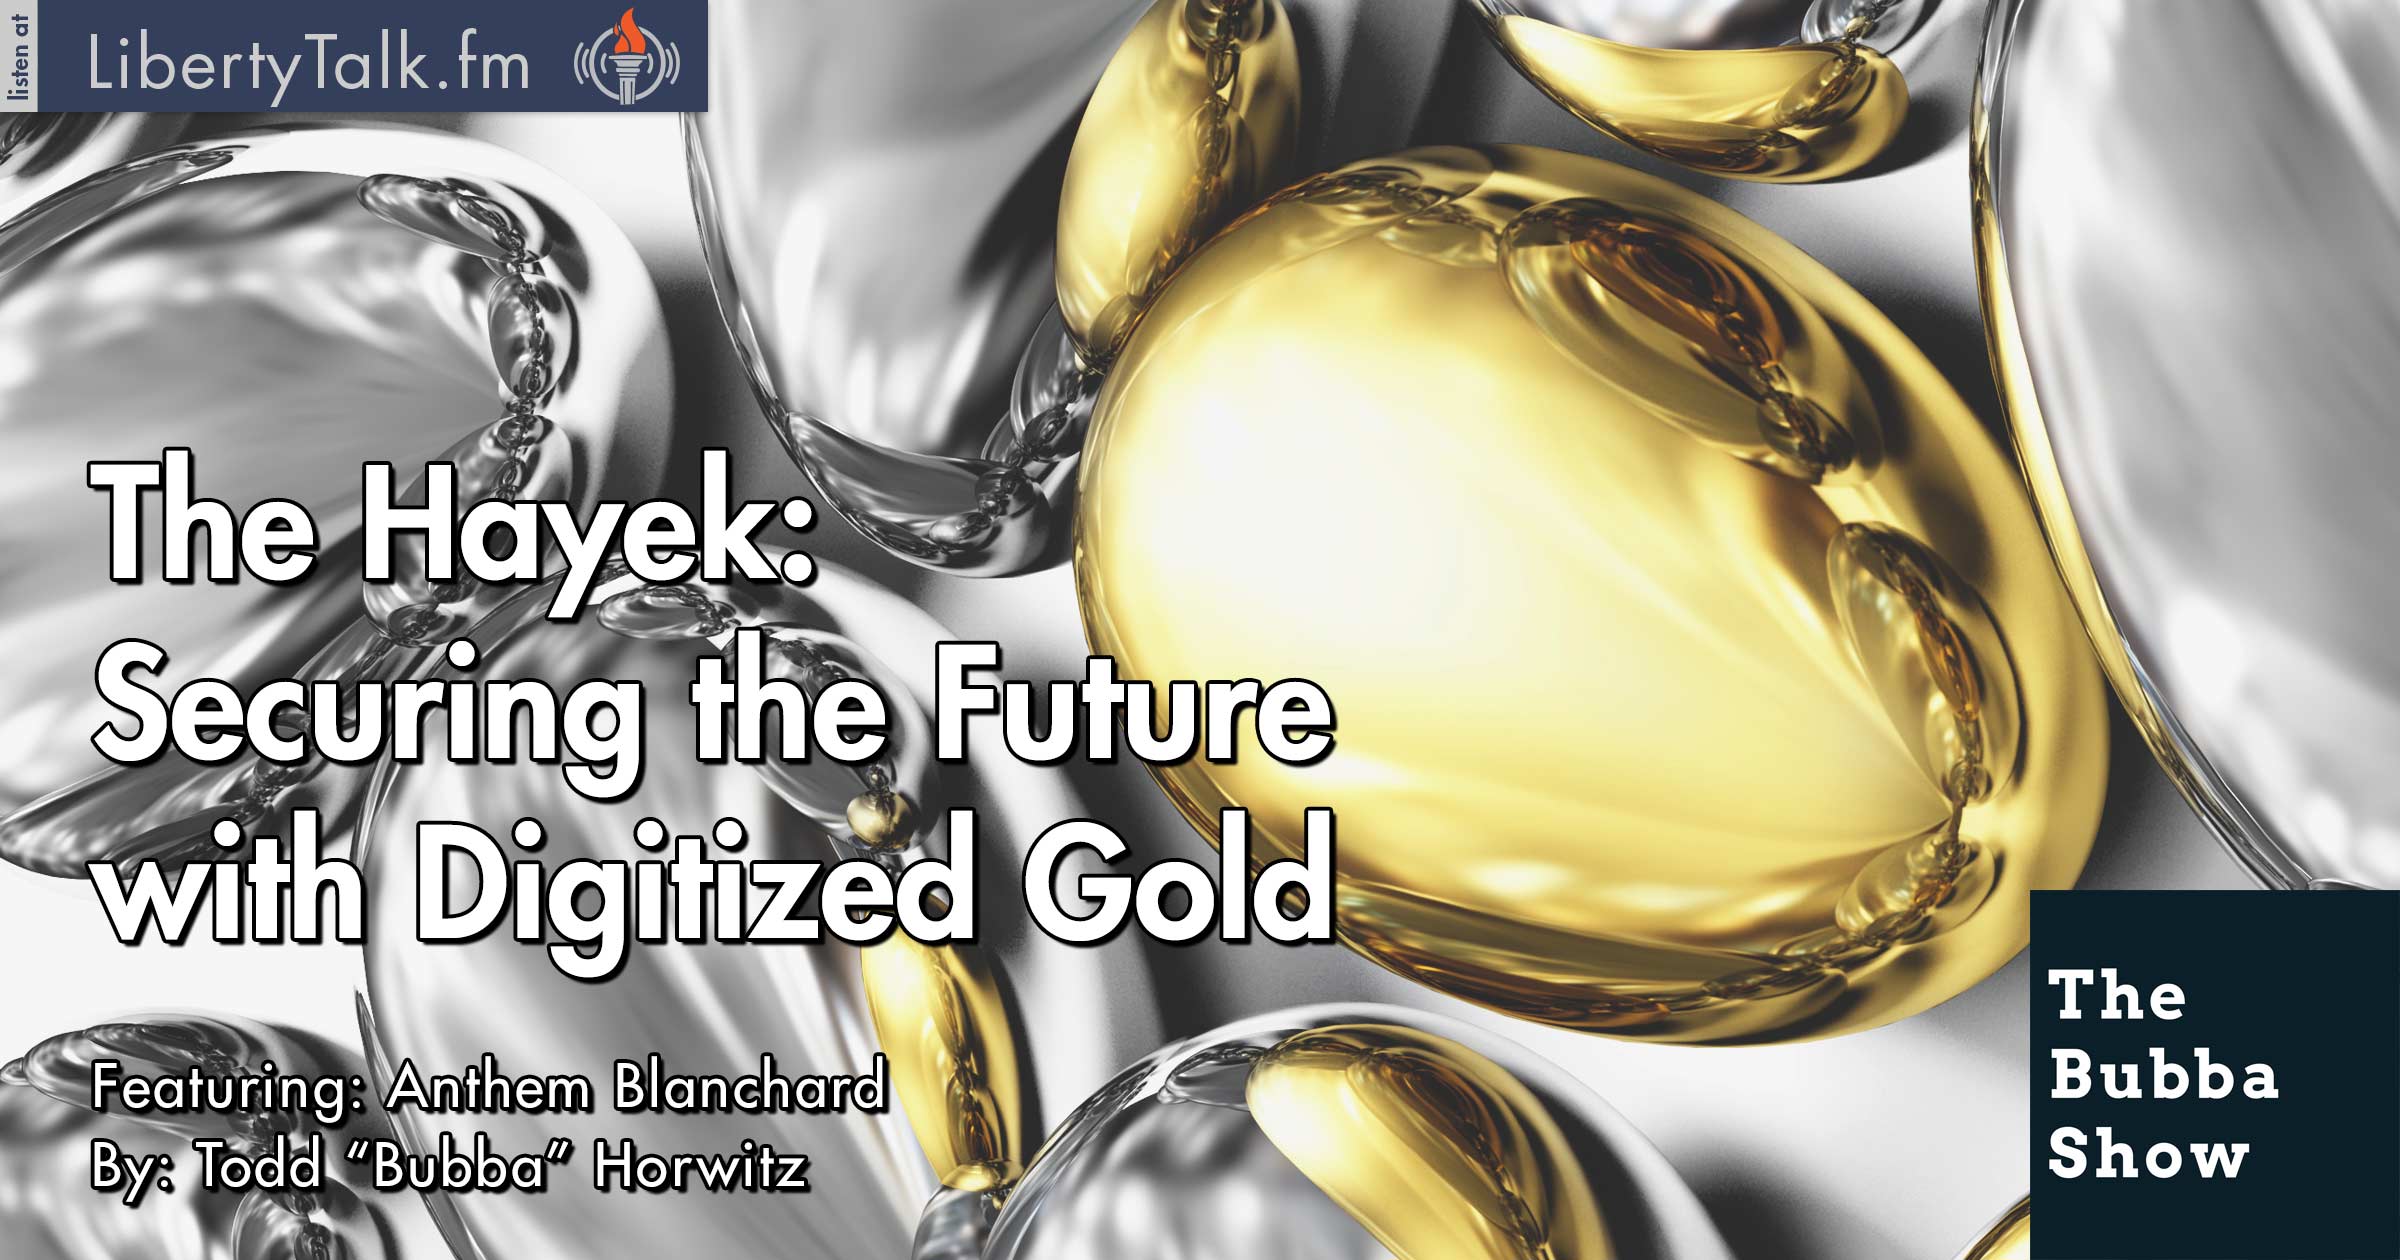 The Hayek: Securing the Future with Digitized Gold - The Bubba Show